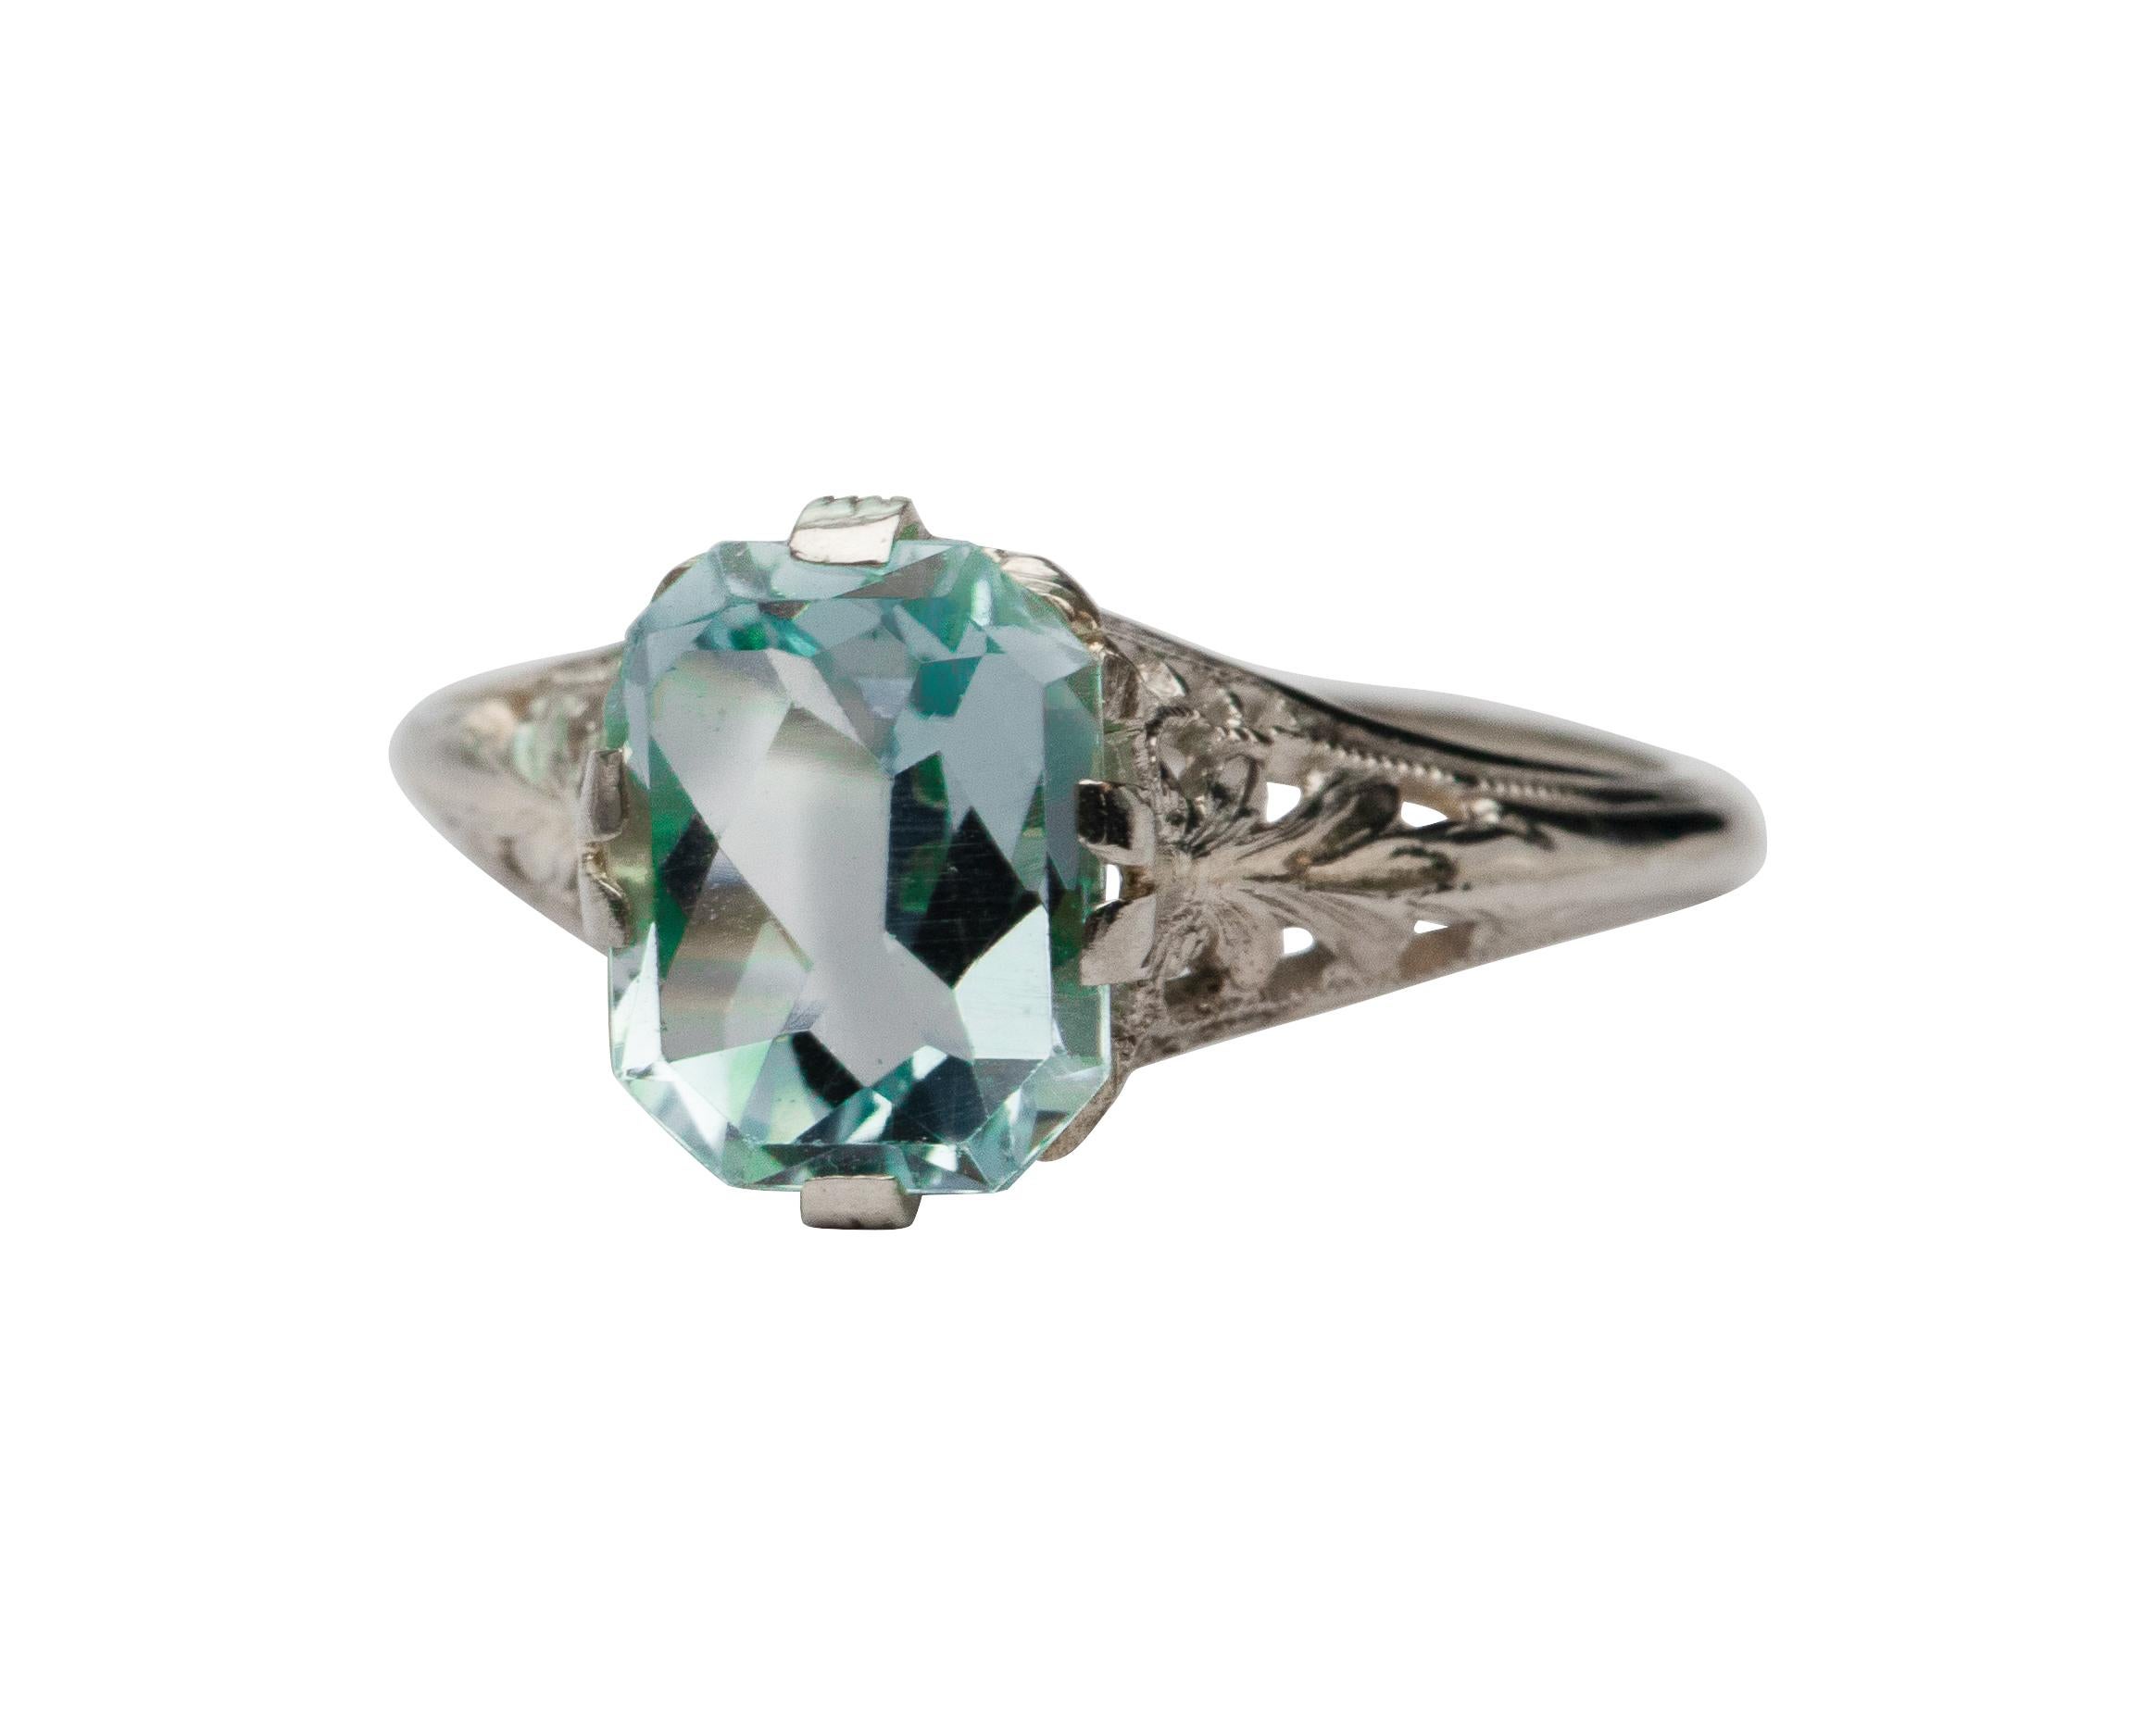 This lovely art deco aquamarine ring is a fantastic example of a turn of the century fashion piece. The beautiful pastel blue shade of the aquamarine shines in the intricate filigree white gold mounting. A delicate array of pierced designs accented